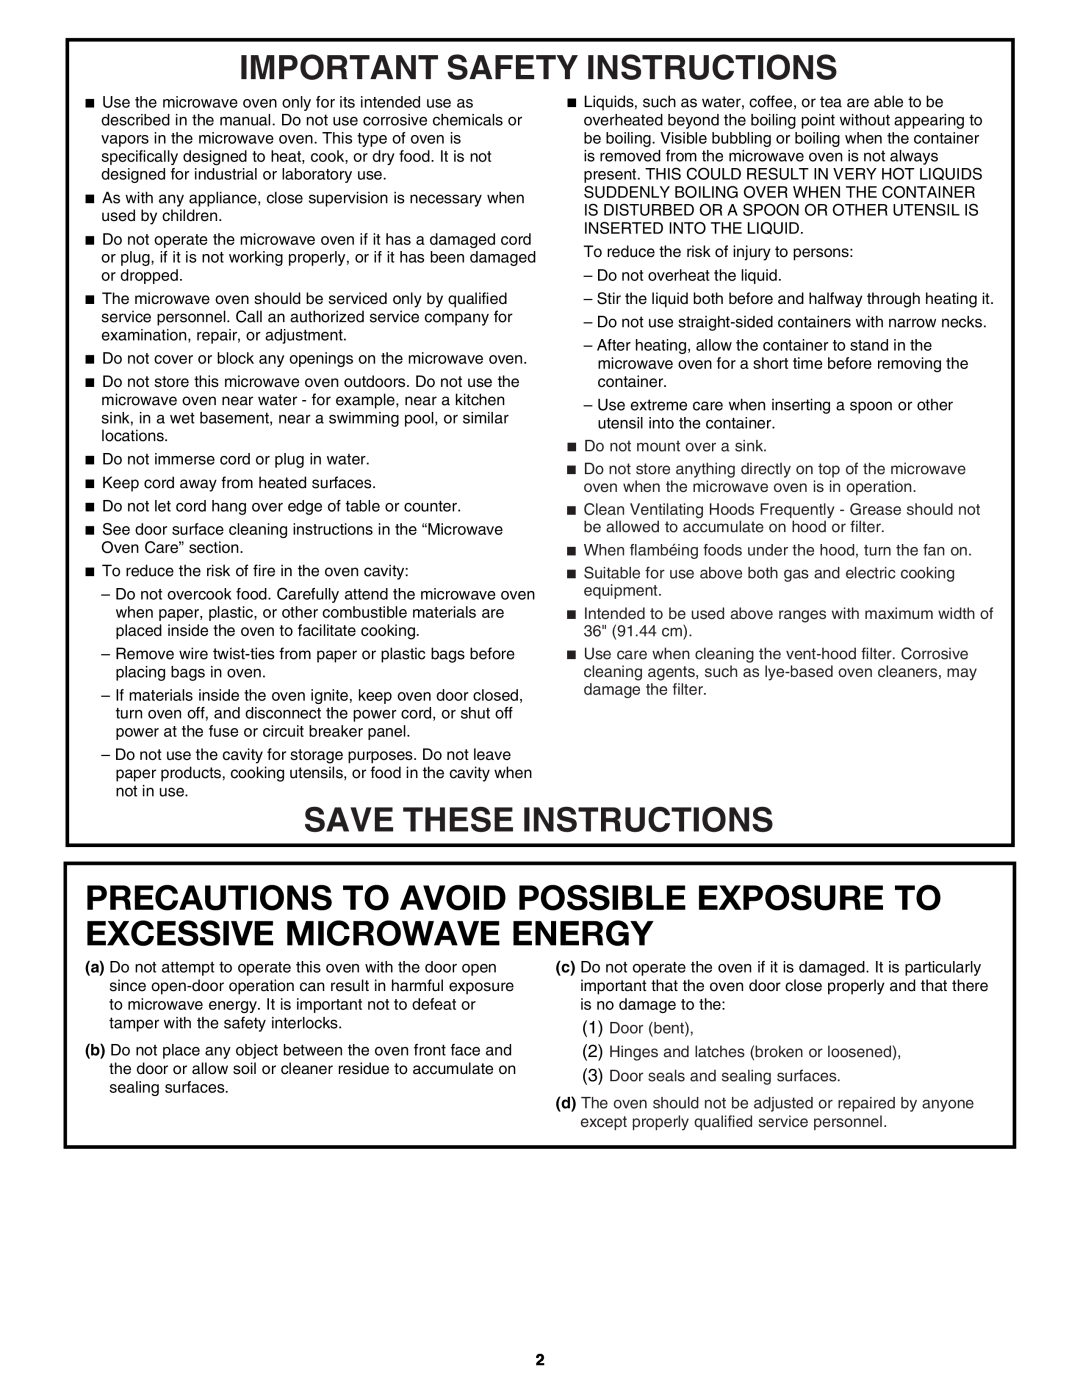 Whirlpool W10545083A Precautions To Avoid Possible Exposure To Excessive Microwave Energy, Important Safety Instructions 